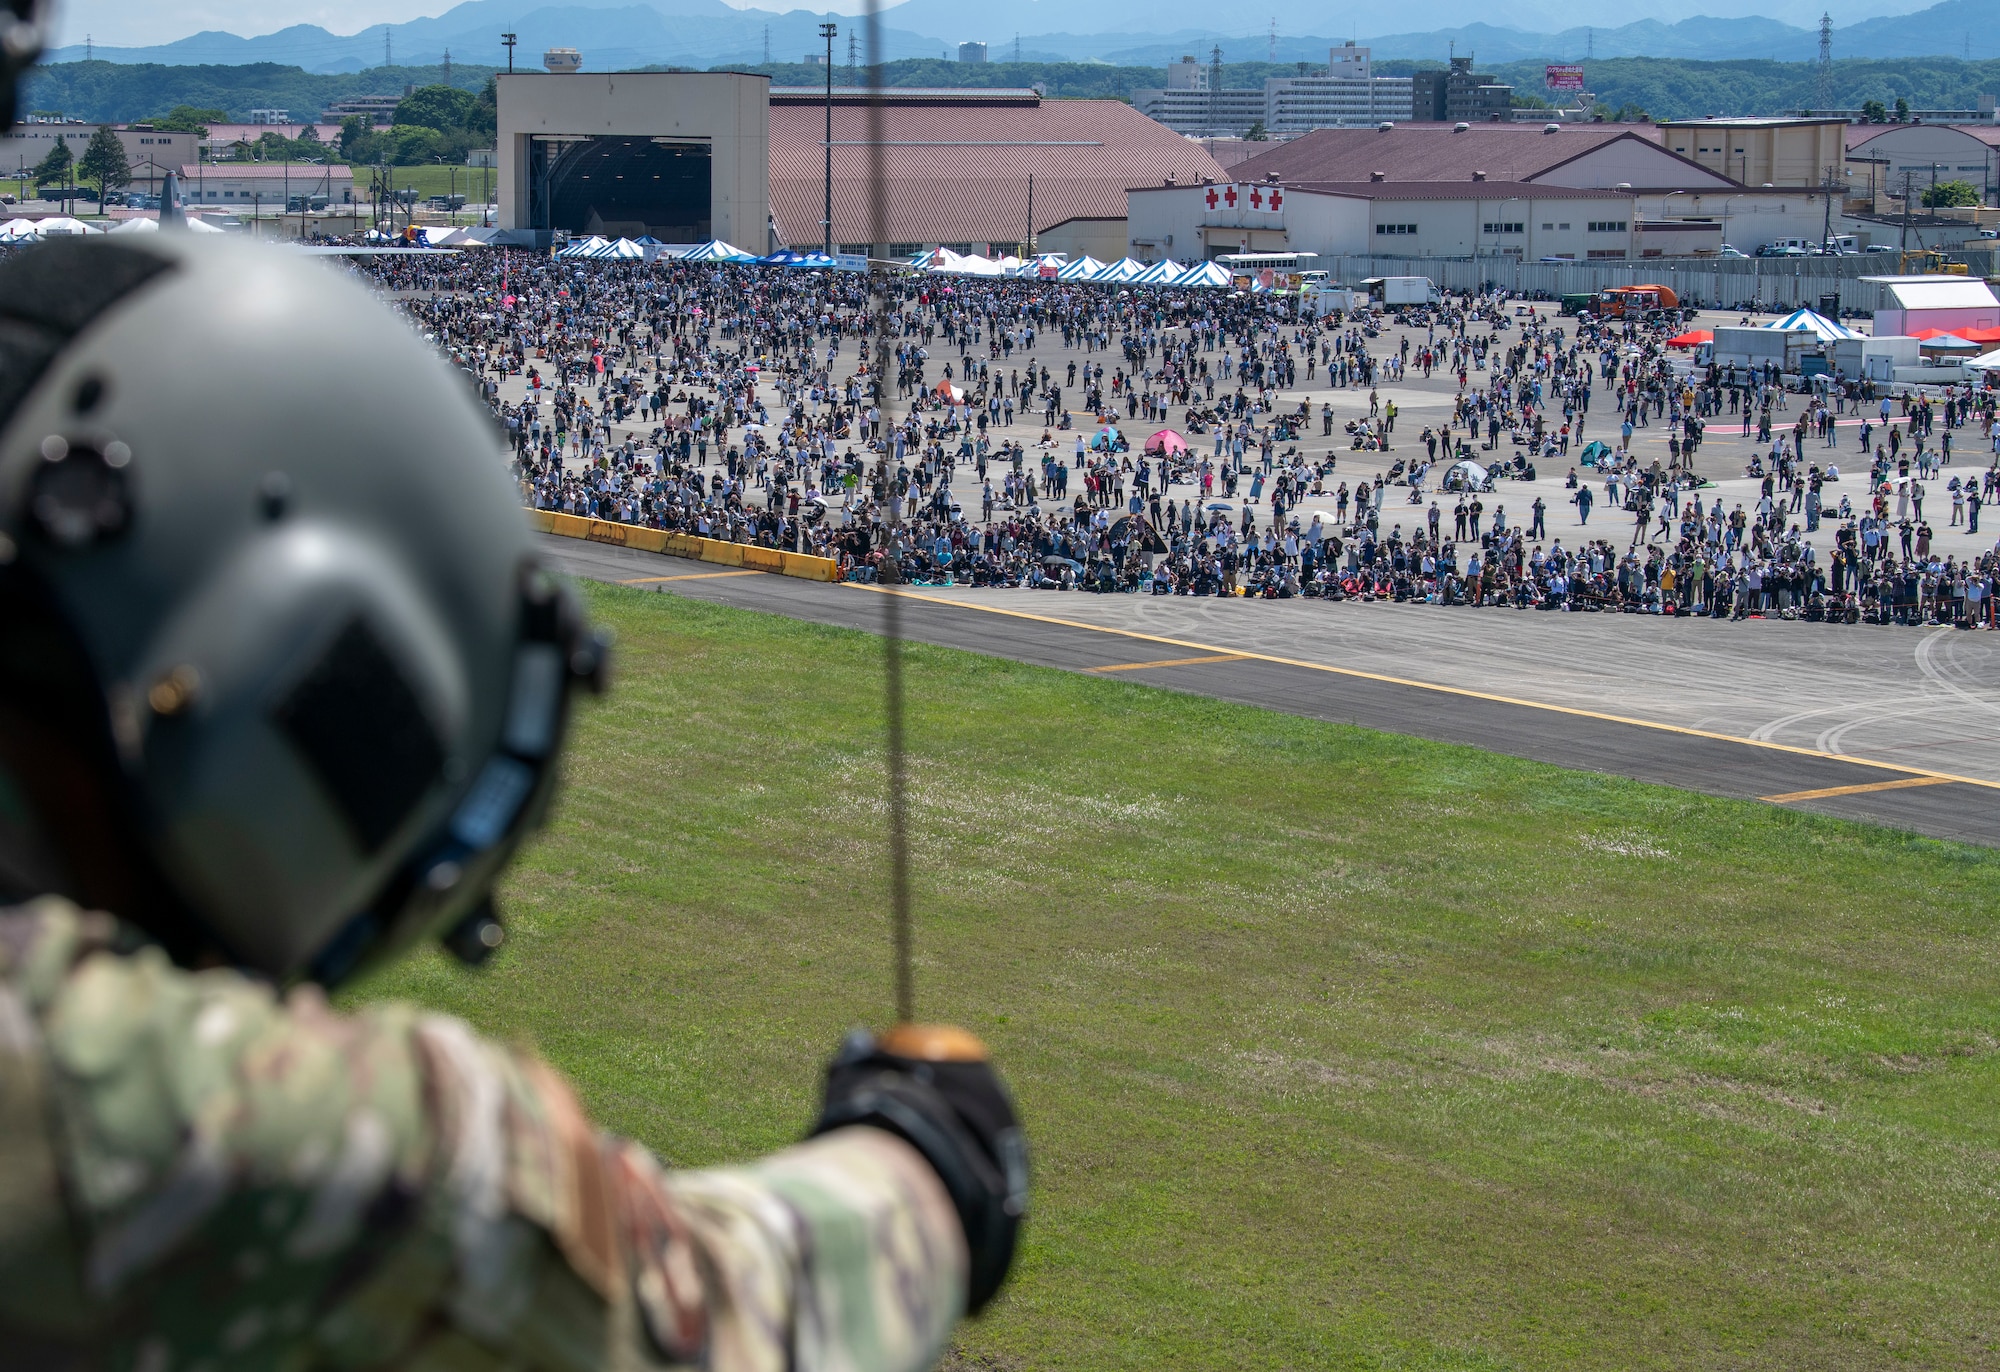 Attendees watch as Tech. Sgt. Kevin Bell, 459th Airlift Squadron flight engineer, guides a hoist during Friendship Festival 2022, at Yokota Air Base, Japan May 22, 2022. The two-day festival was an opportunity for visitors to learn more about the U.S. and Japan bilateral partnership, while strengthening the bonds between Yokota and the local communities. Yokota was able to host the event with the support of Japan Self-Defense Force, sister services and the local community. (U.S. Air Force photo by Senior Airman Hannah Bean)